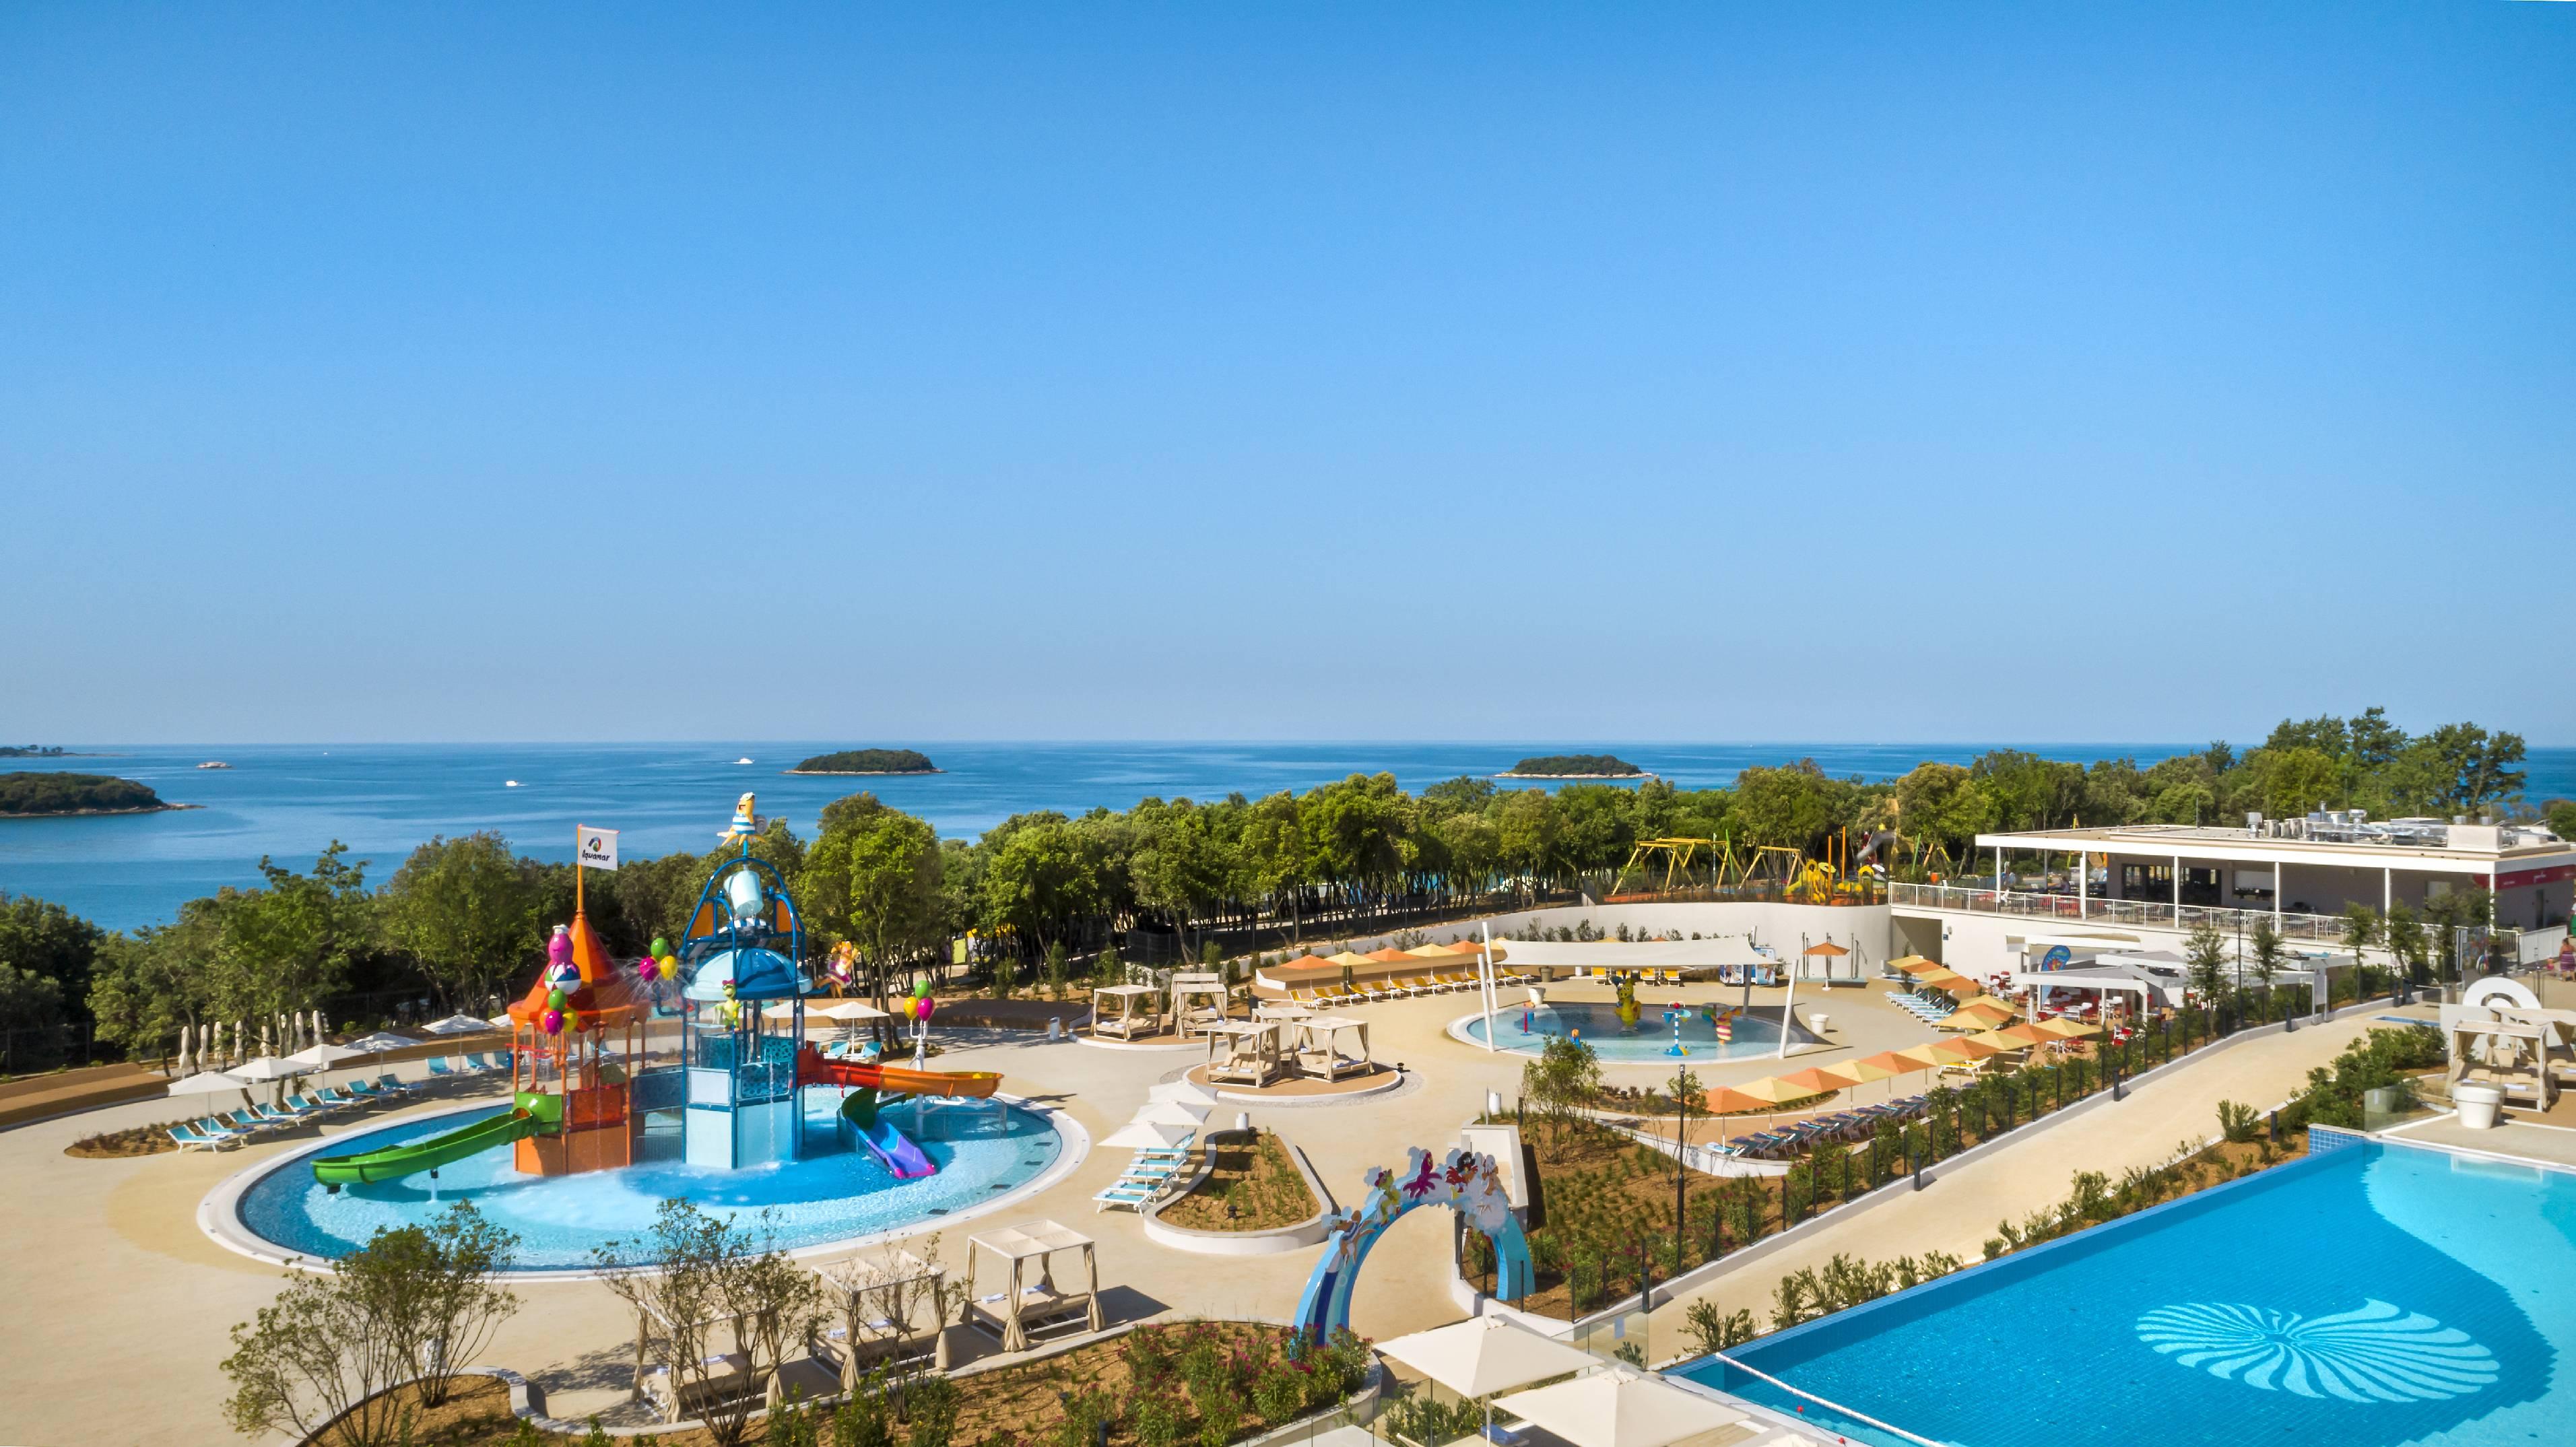 NEW FOR THE SEASON 2020: Camping on the Adriatic Coast! – image 1